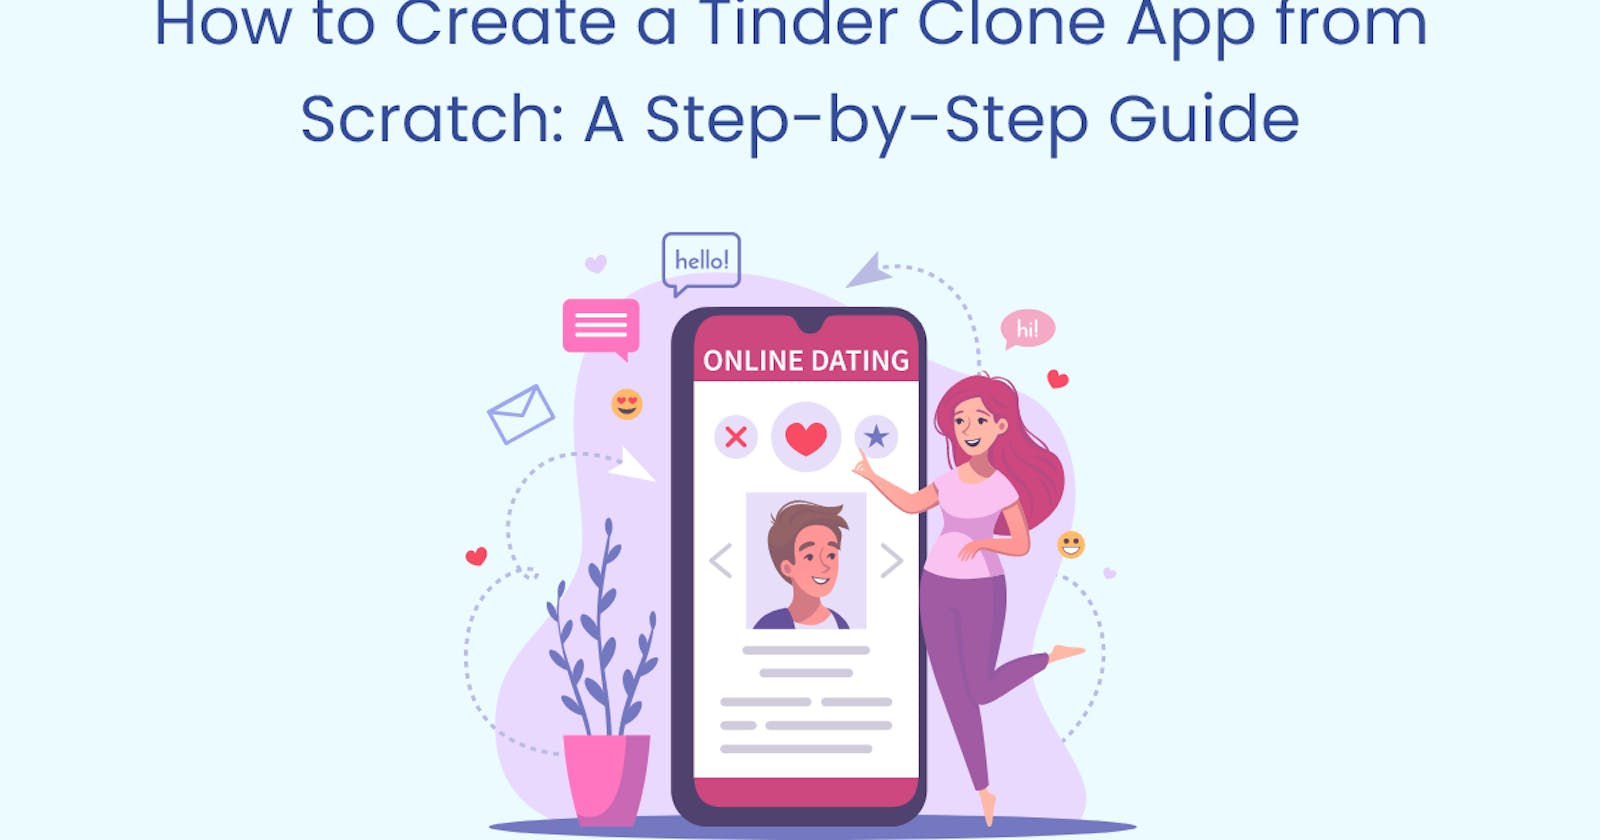 How to Create a Tinder Clone App from Scratch: A Step-by-Step Guide